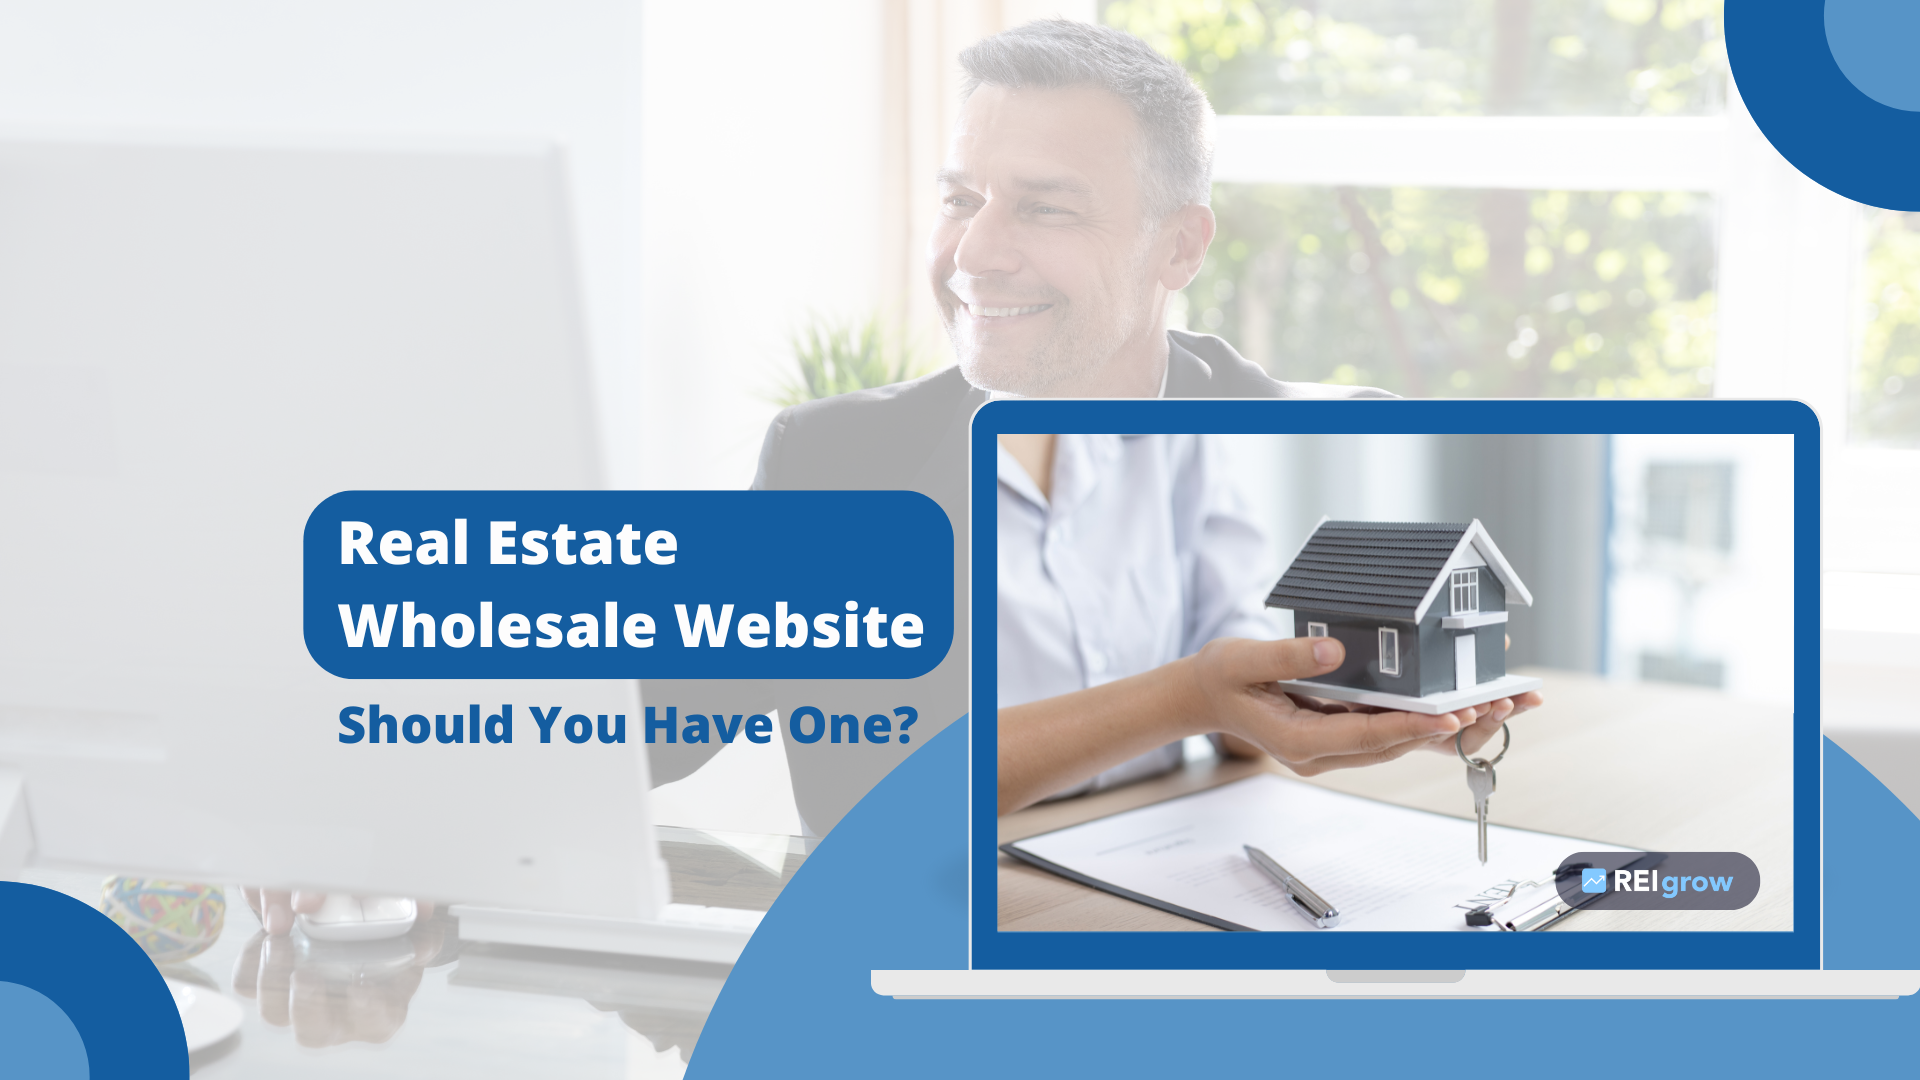 real estate wholesale website - do you need one or not